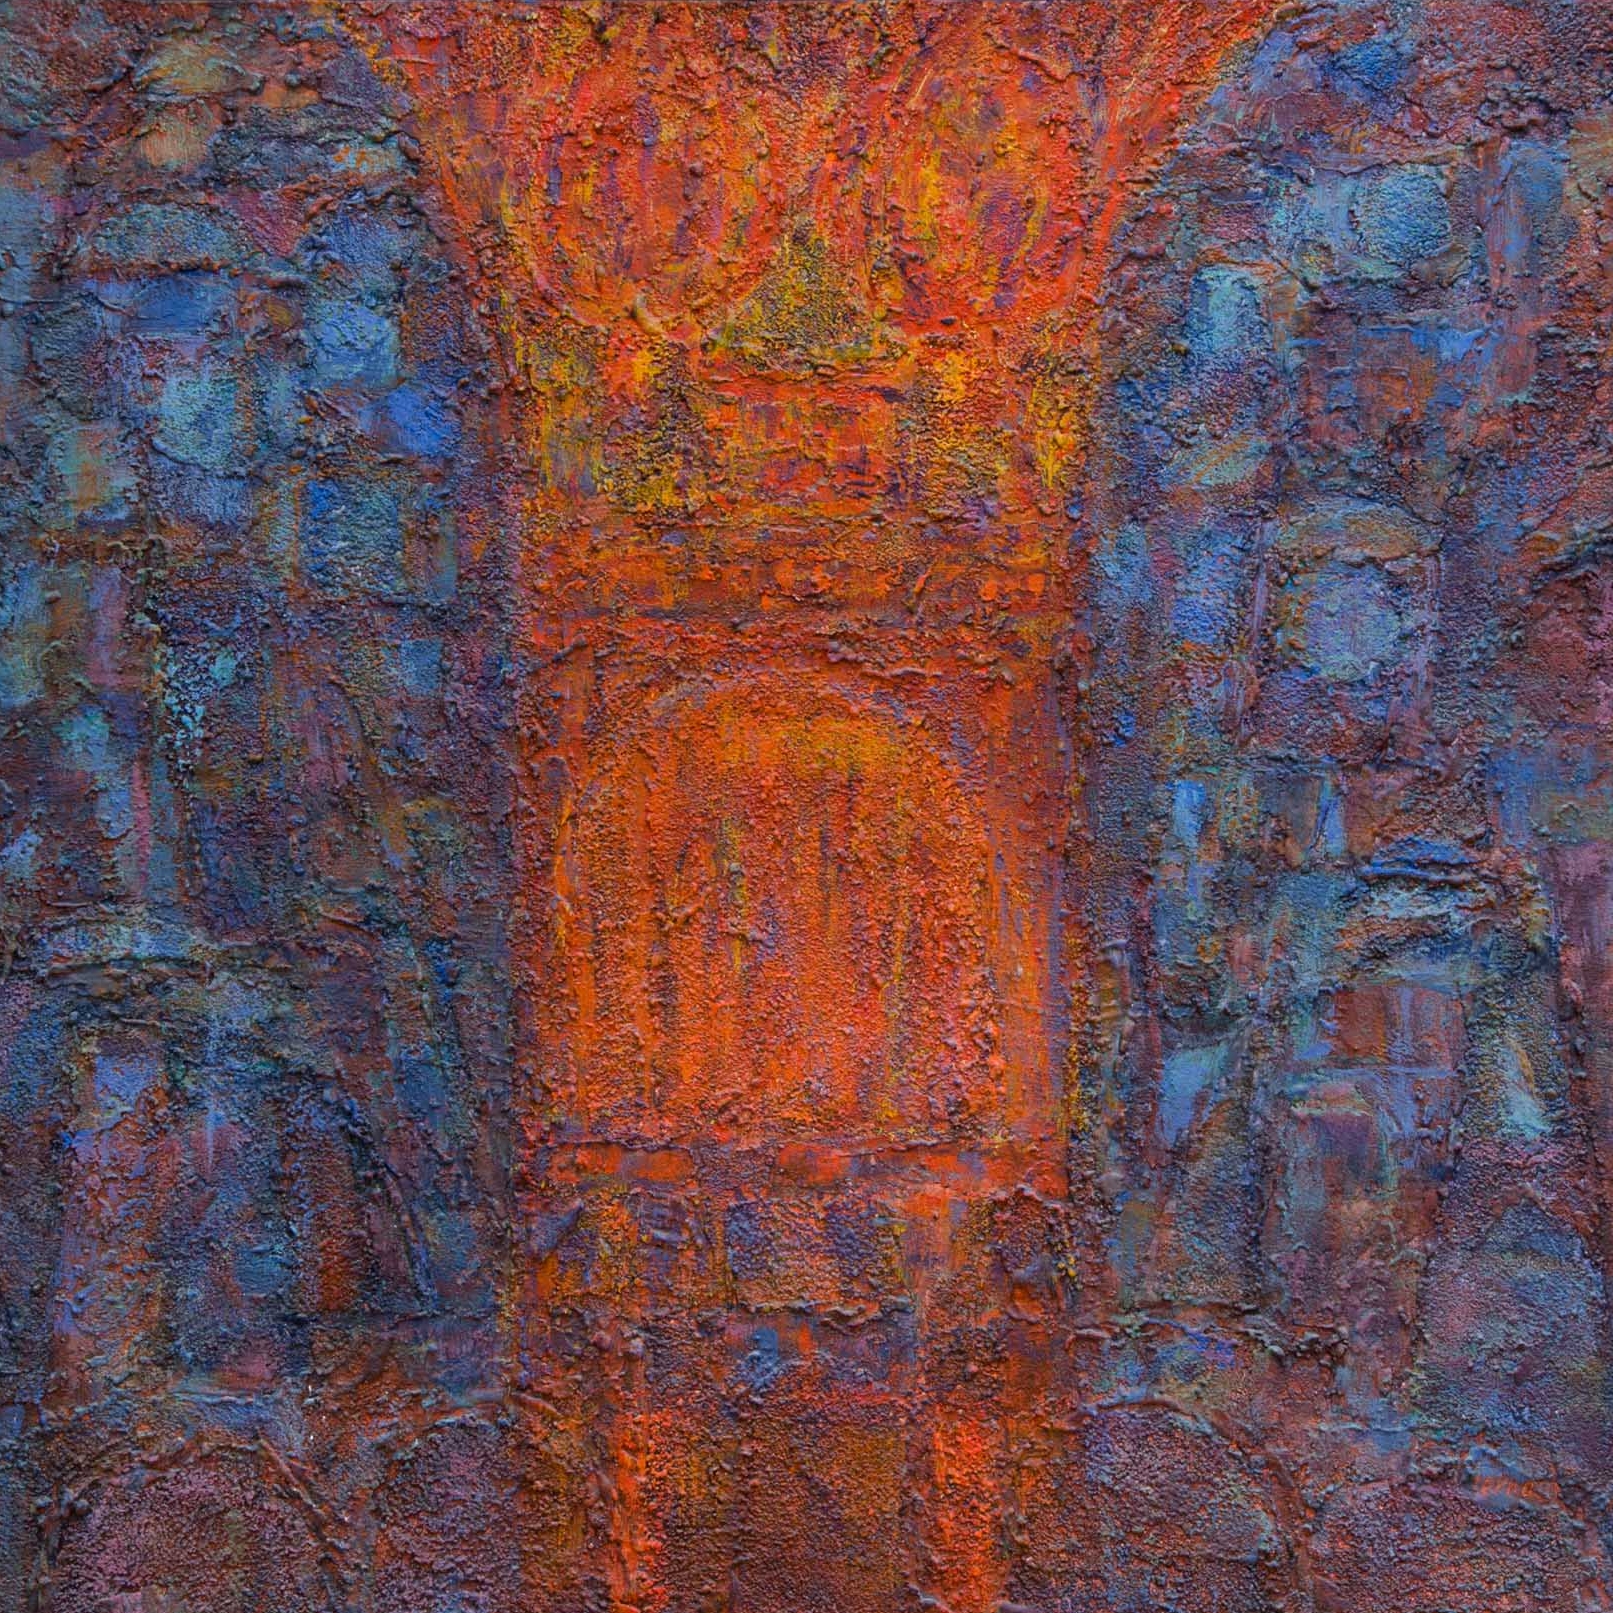   A Column of Fire,  August 1983, Acrylic and aggregate on canvas, 30 x 30 in, Collection of United States Holocaust Memorial Museum 